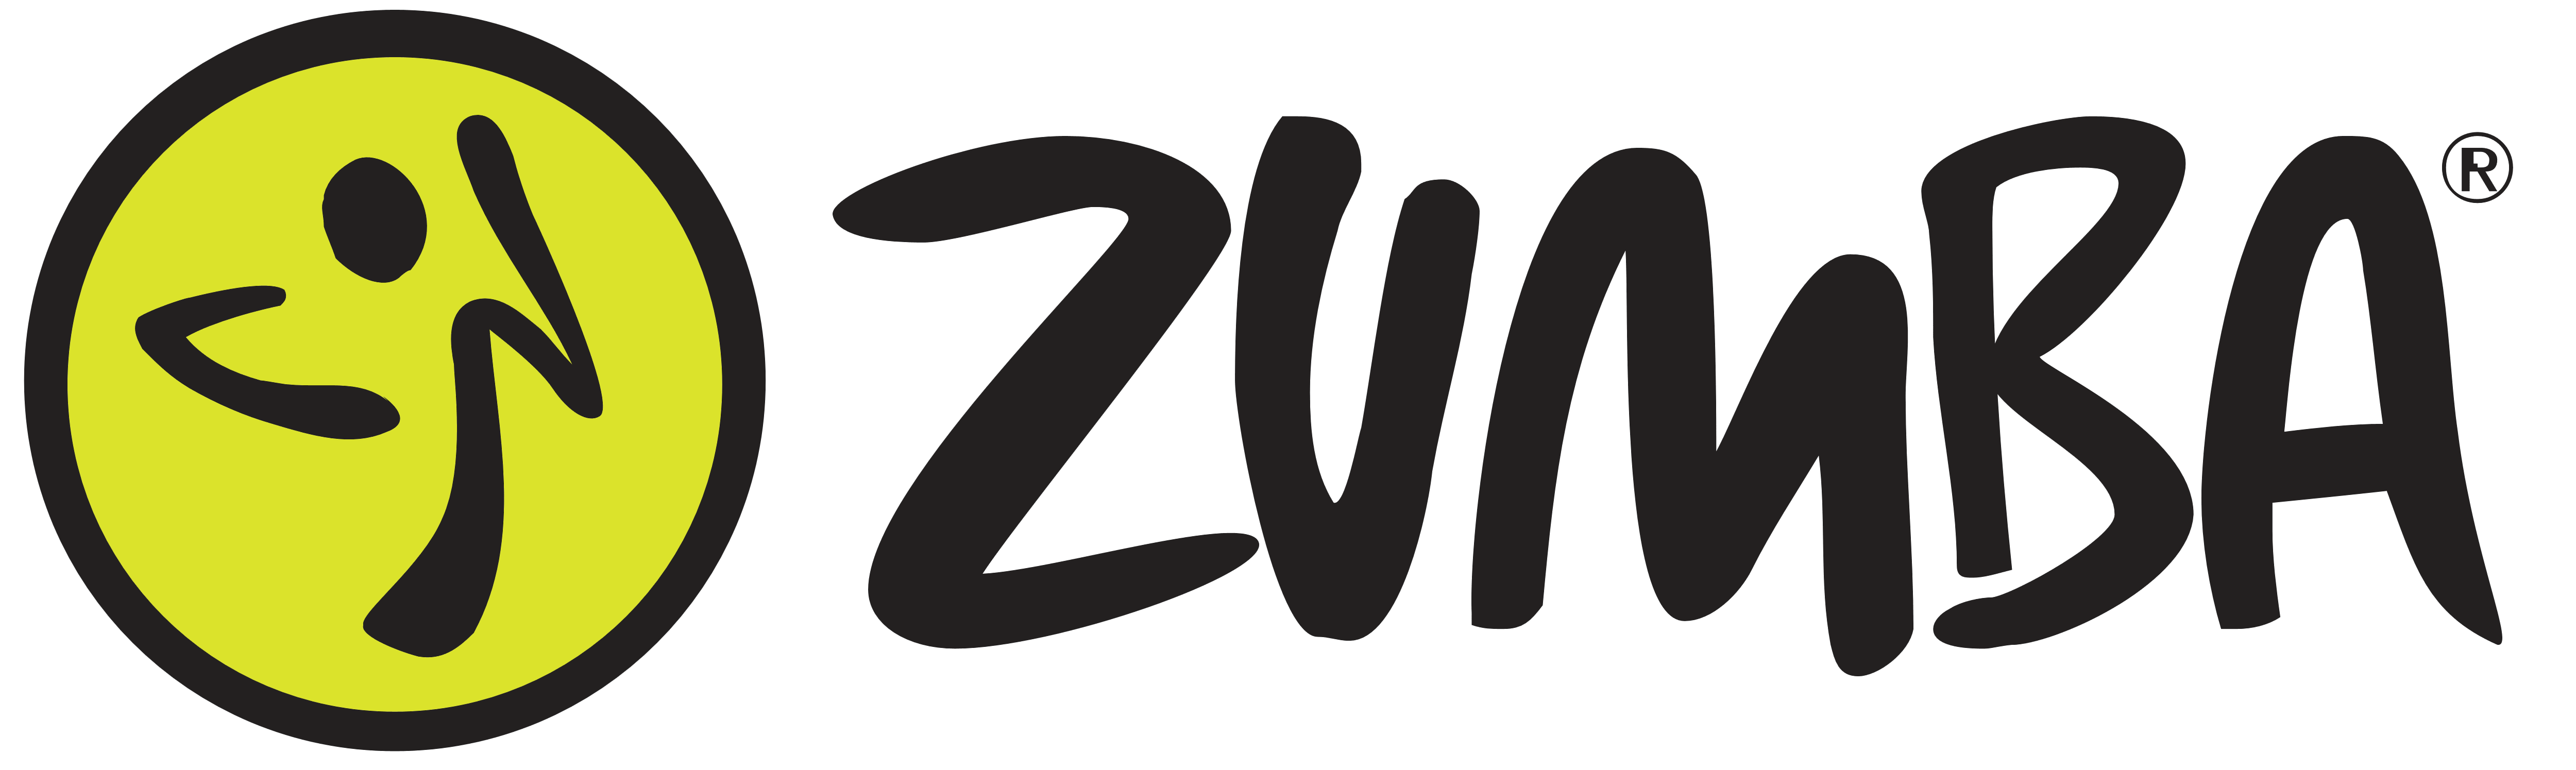 Télécharger photo zumba logo black and white png